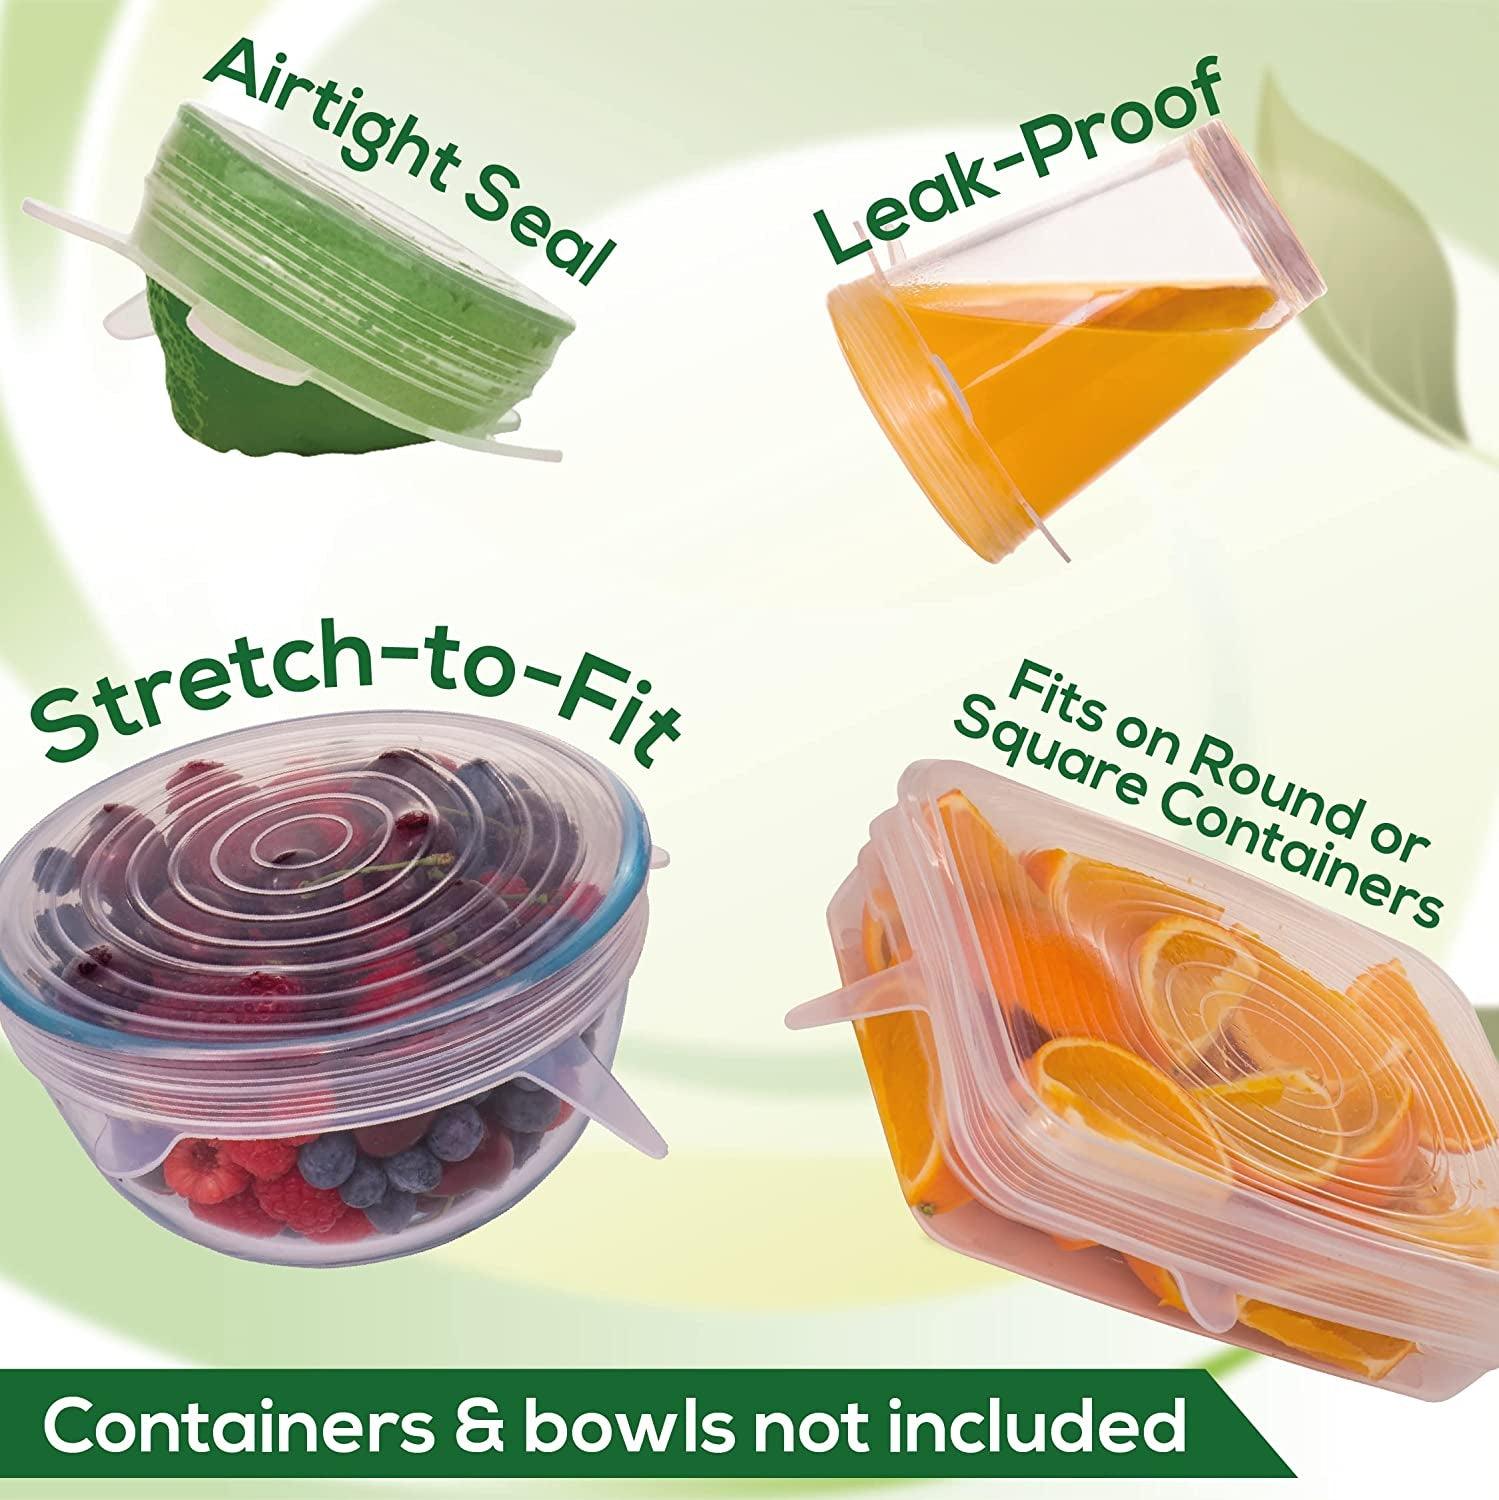 Reusable Silicone Lids – Versatile Freezer to Microwave Cover for Food – Leak-Proof Silicone Stretch Lids for 3” - 12” Container, Bowl, or Cup – Dishwasher Safe Silicone Bowl Covers Transparent Variety Pack (Set of 7)